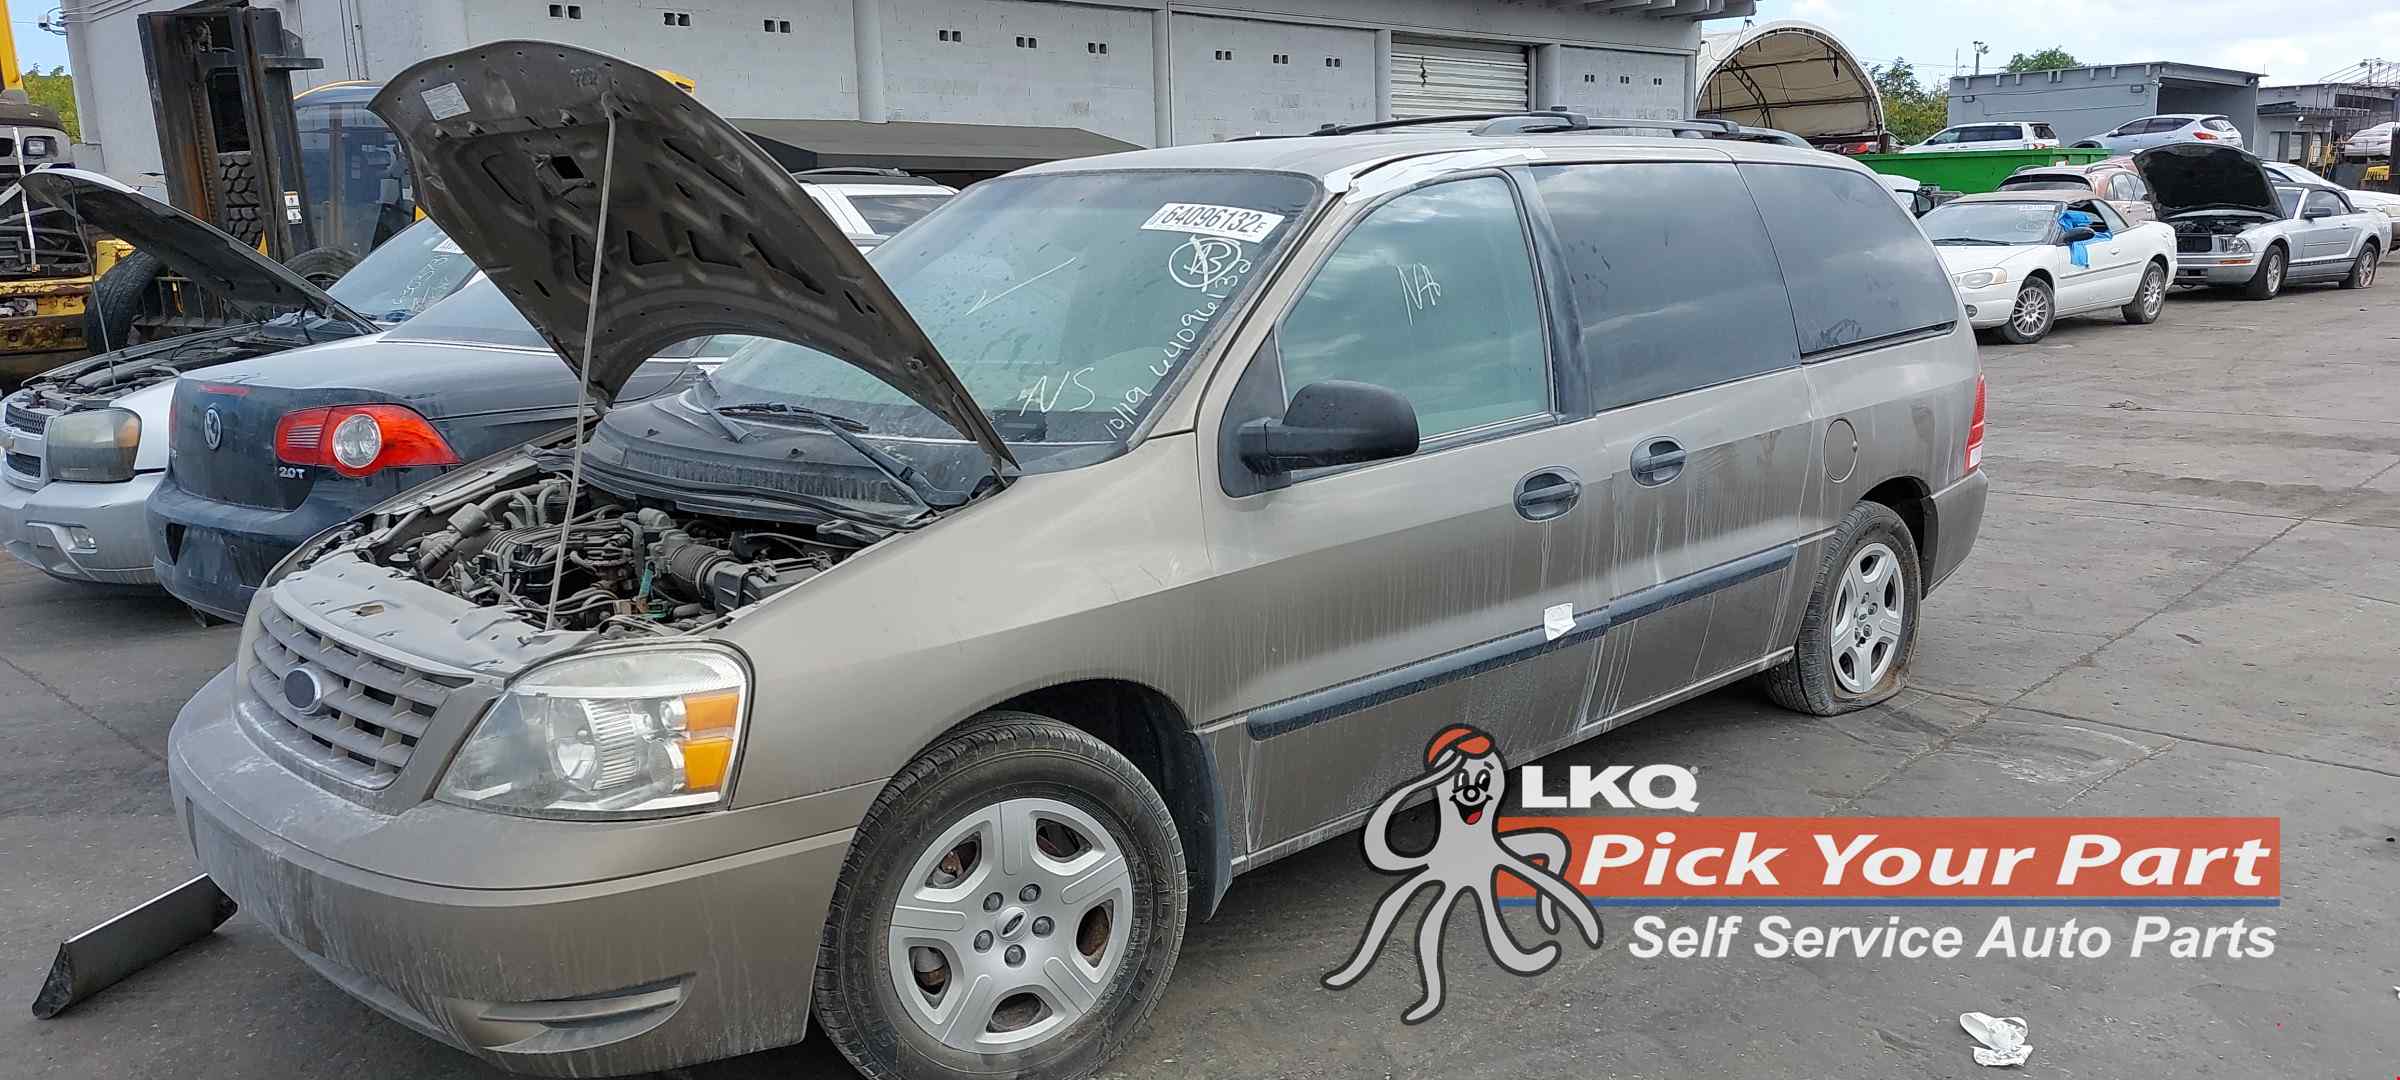 2004 Ford Freestar Used Auto Parts | Ft. Lauderdale